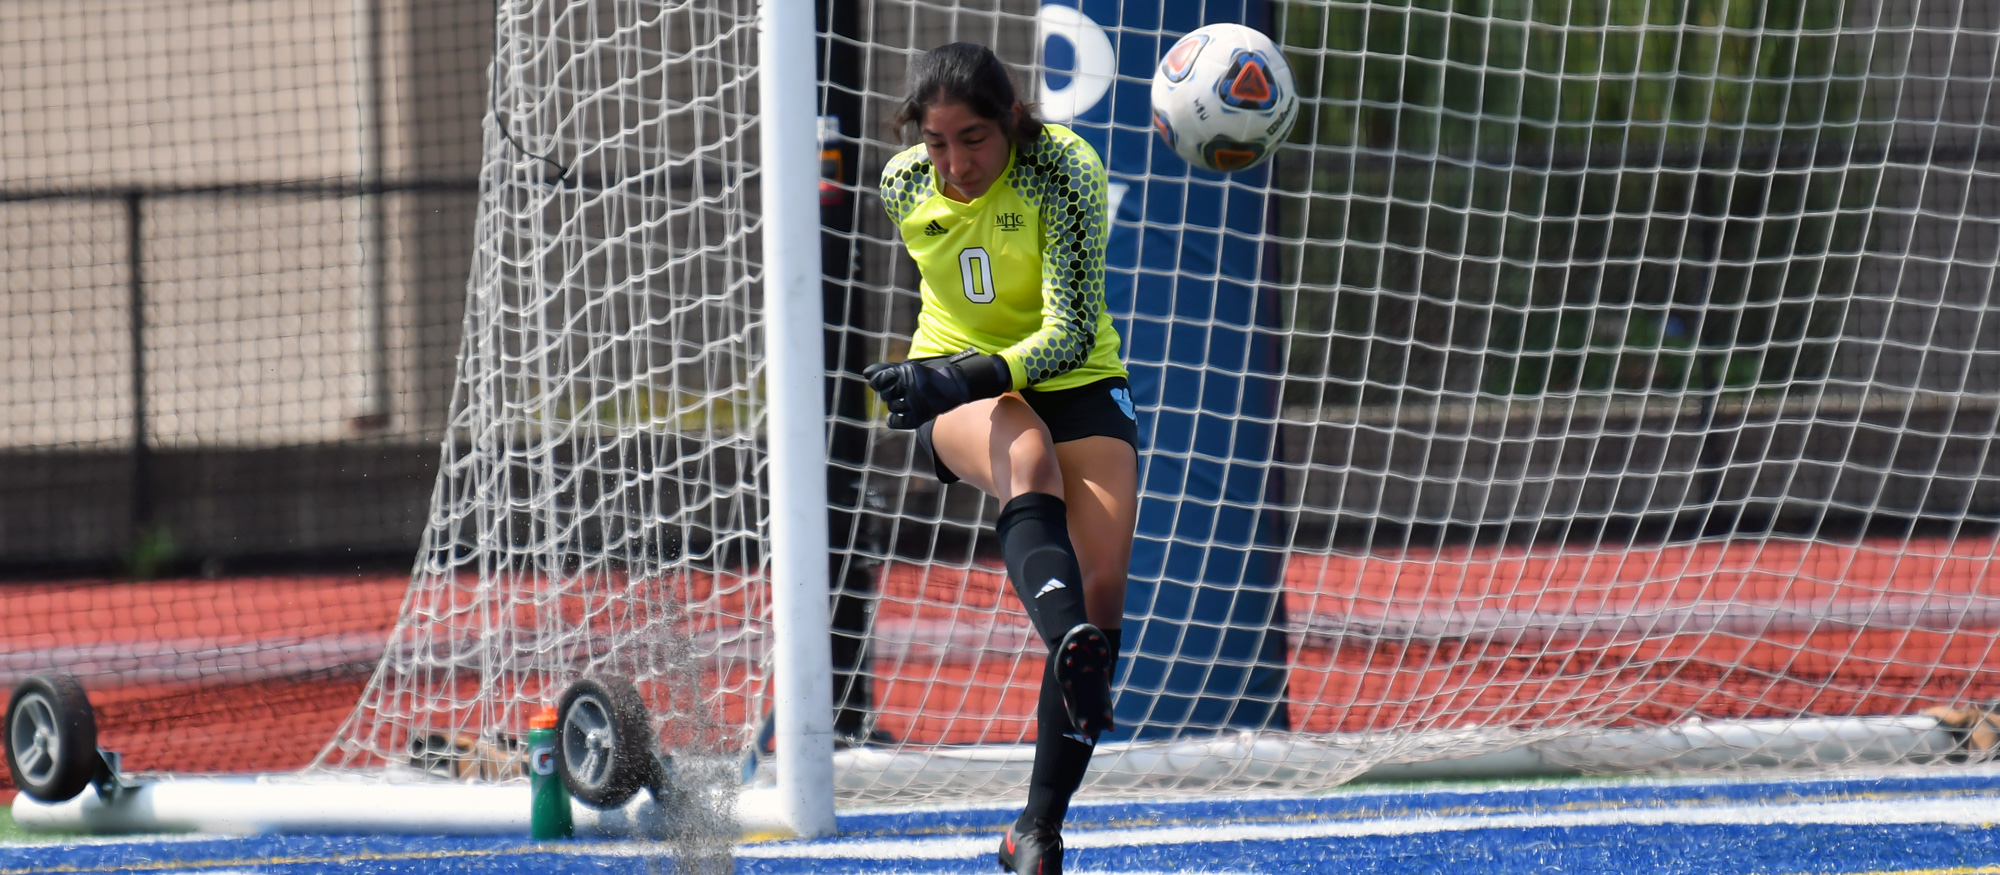 Clarissa Govea made 15 saves and allowed two goals on close-range free kicks in Mount Holyoke's 2-0 loss to Emerson on Oct. 1, 2022. (RJB Sports file photo)